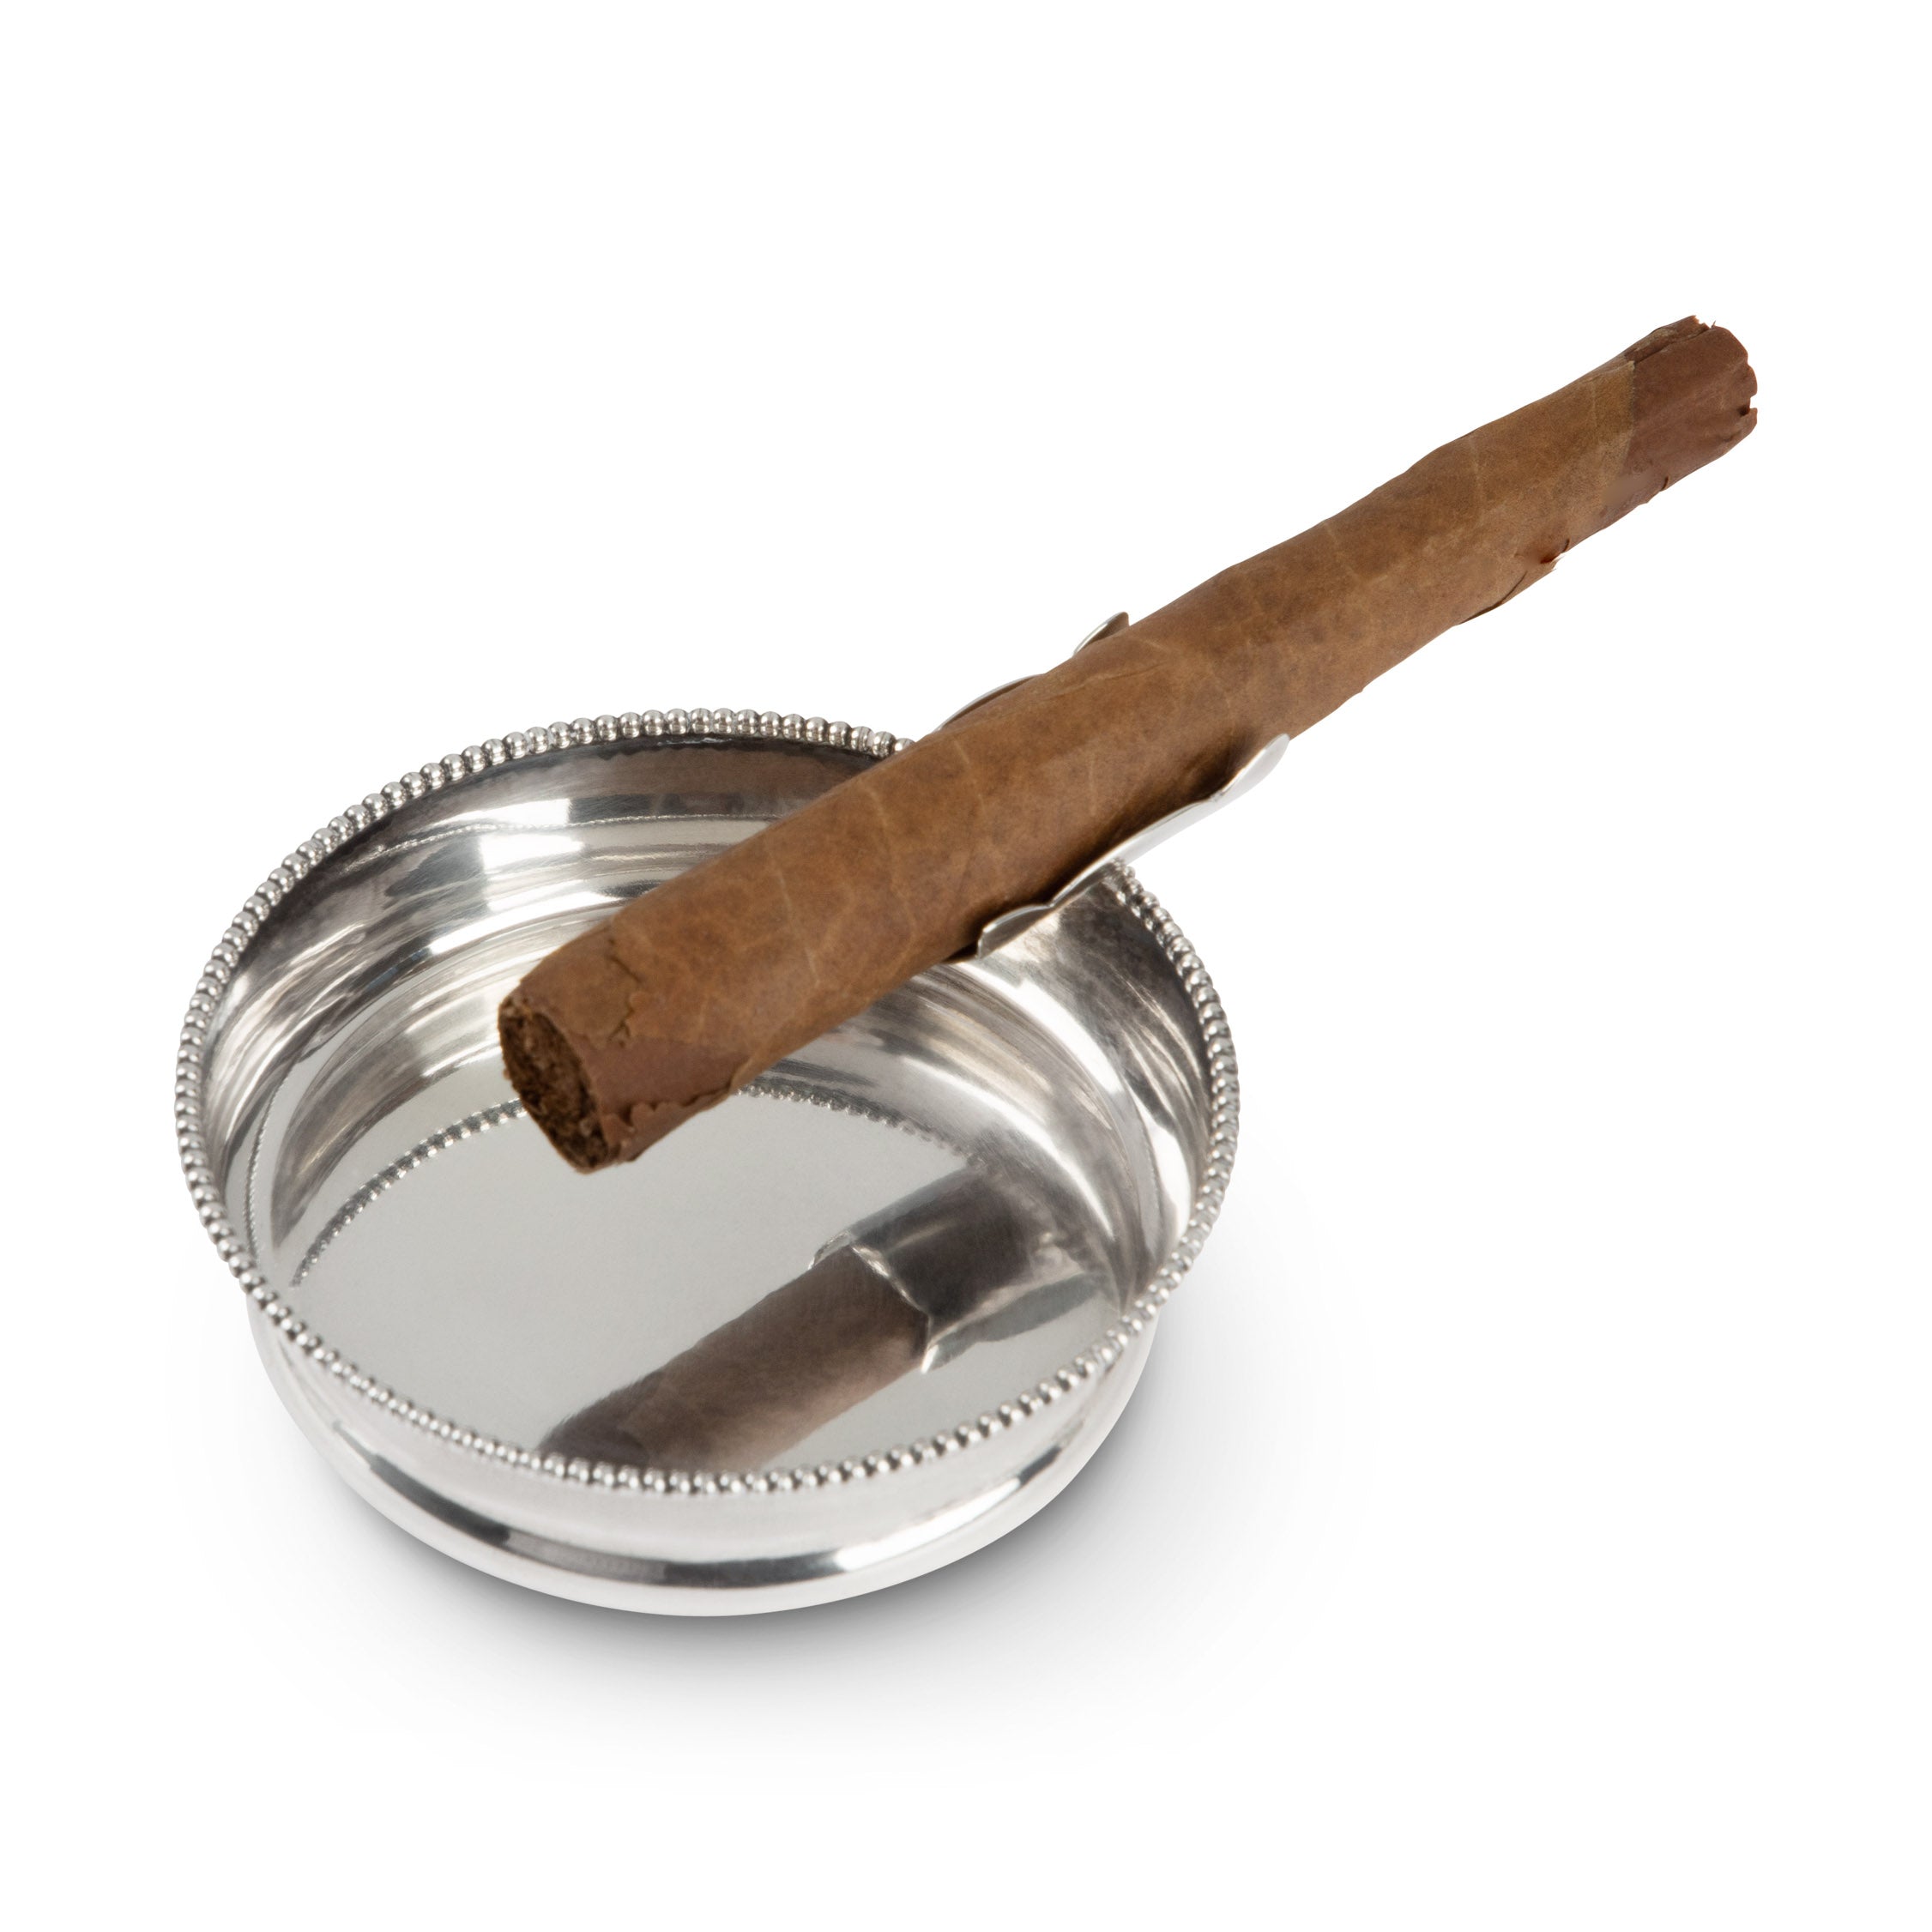 Shreve & Co Sterling Silver Personal Ashtray